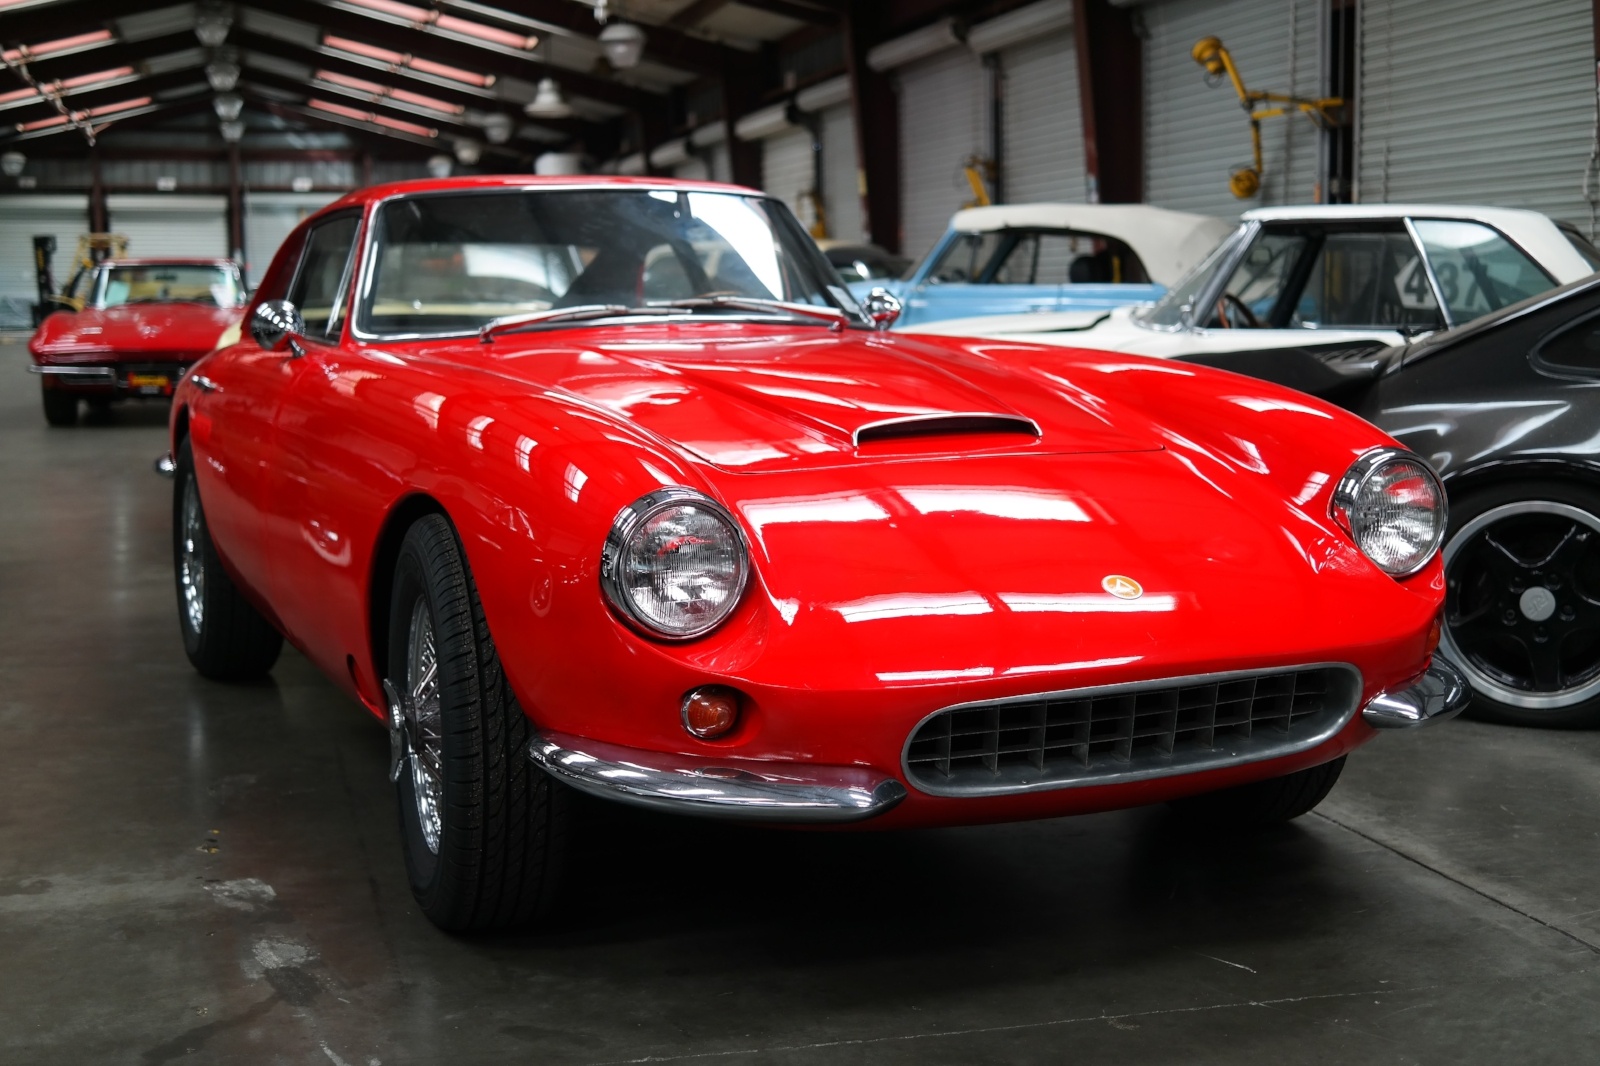 Italian Heritage makes this American classic the ultimate GT car